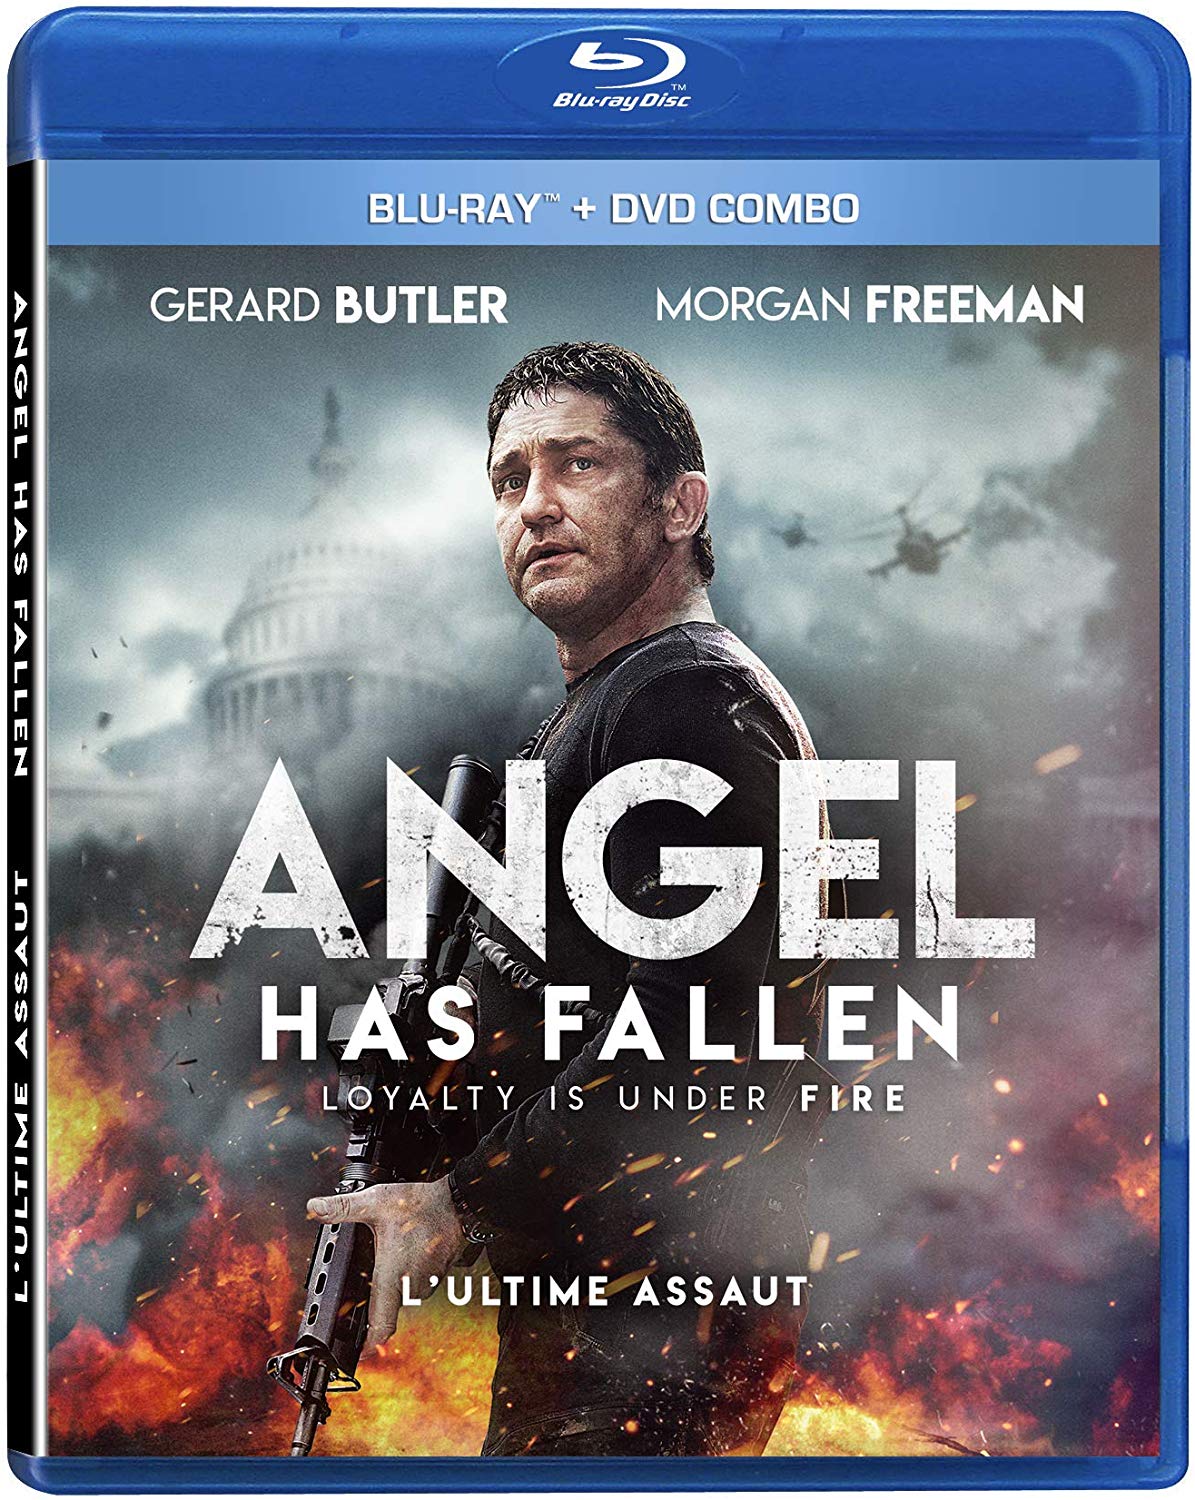 Angel Has Fallen on DVD and Blu-ray